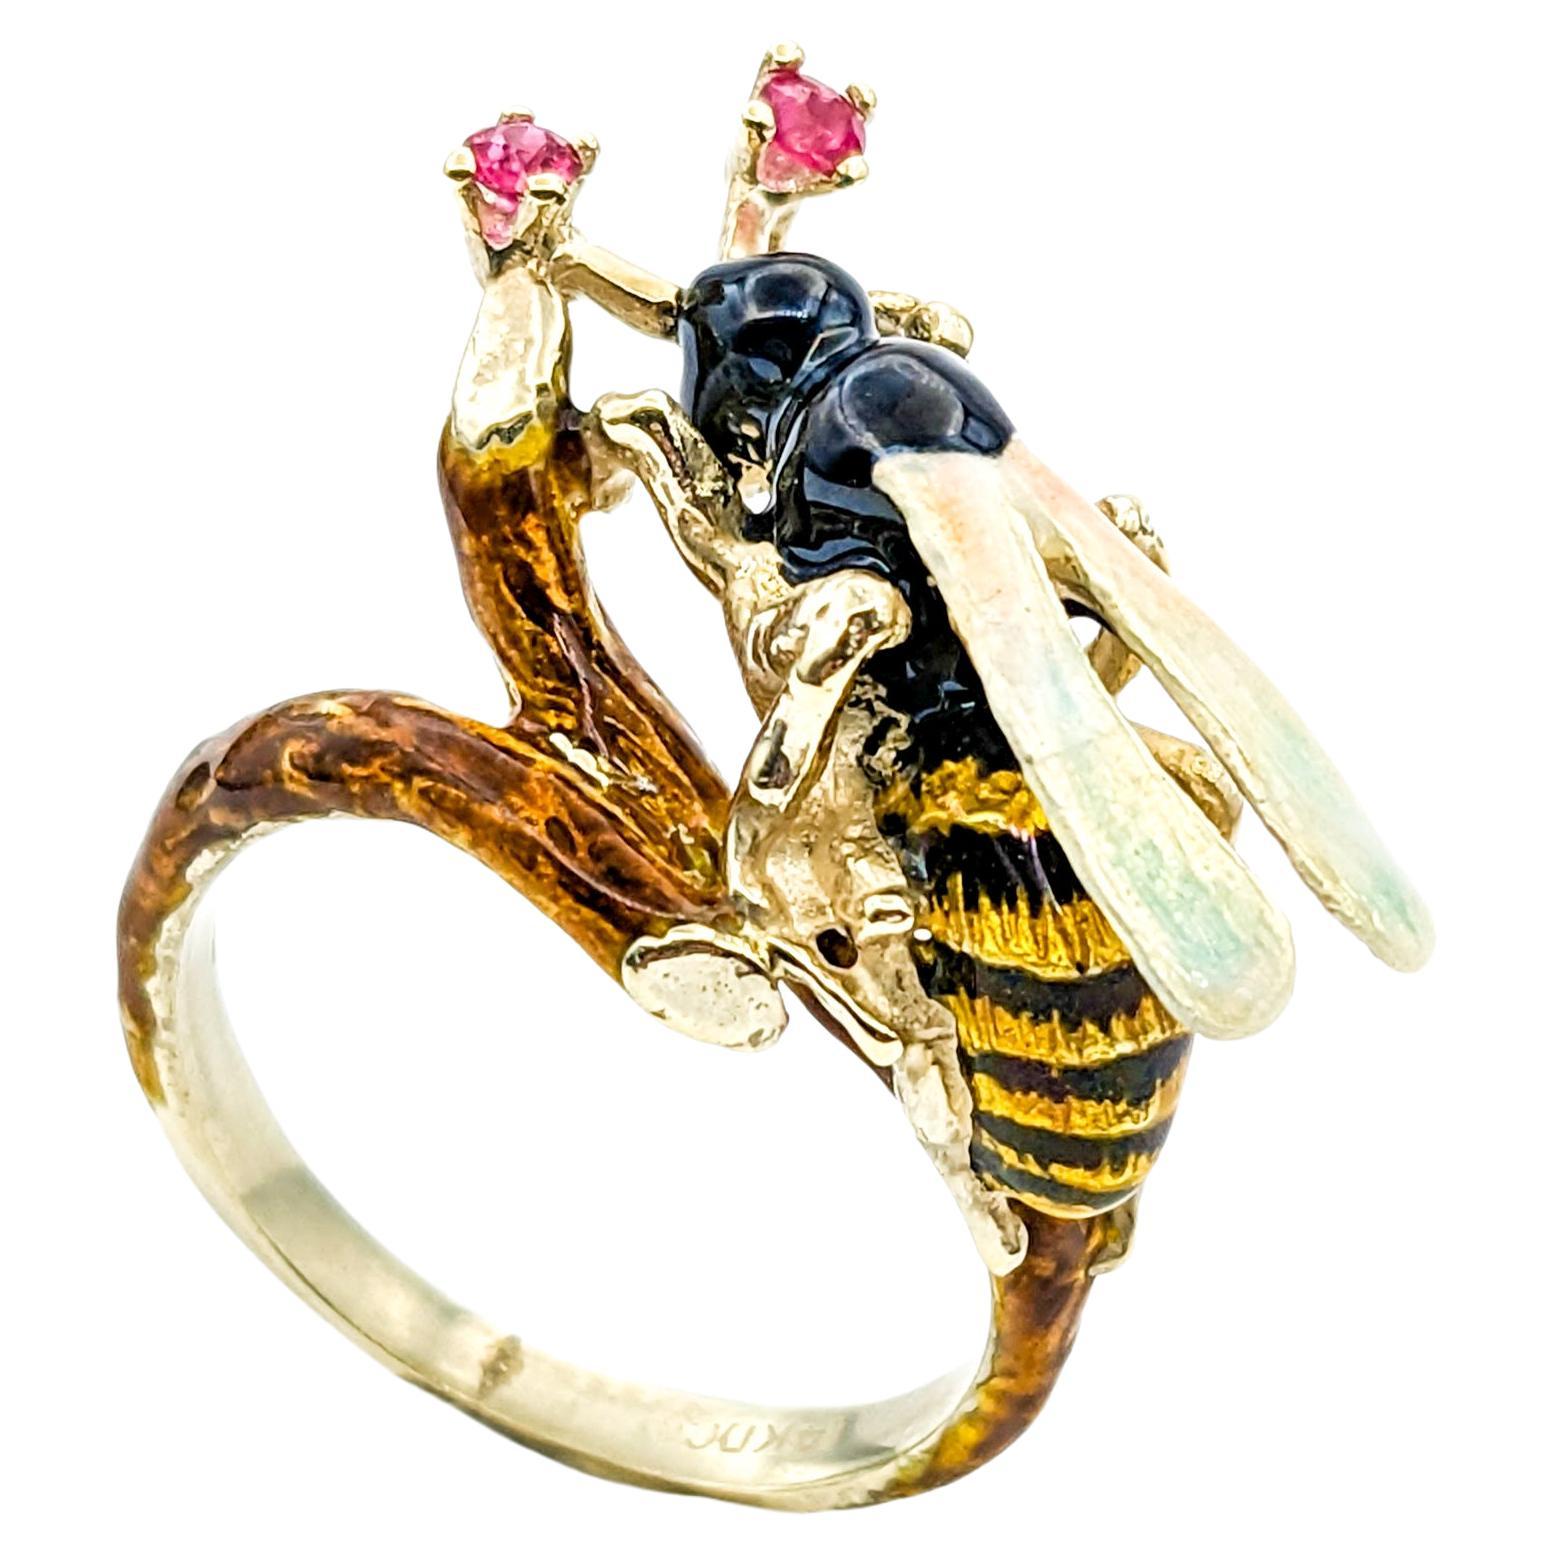 Vintage Figural Enamel Wasp Insect Ring with Rubies In Yellow Gold